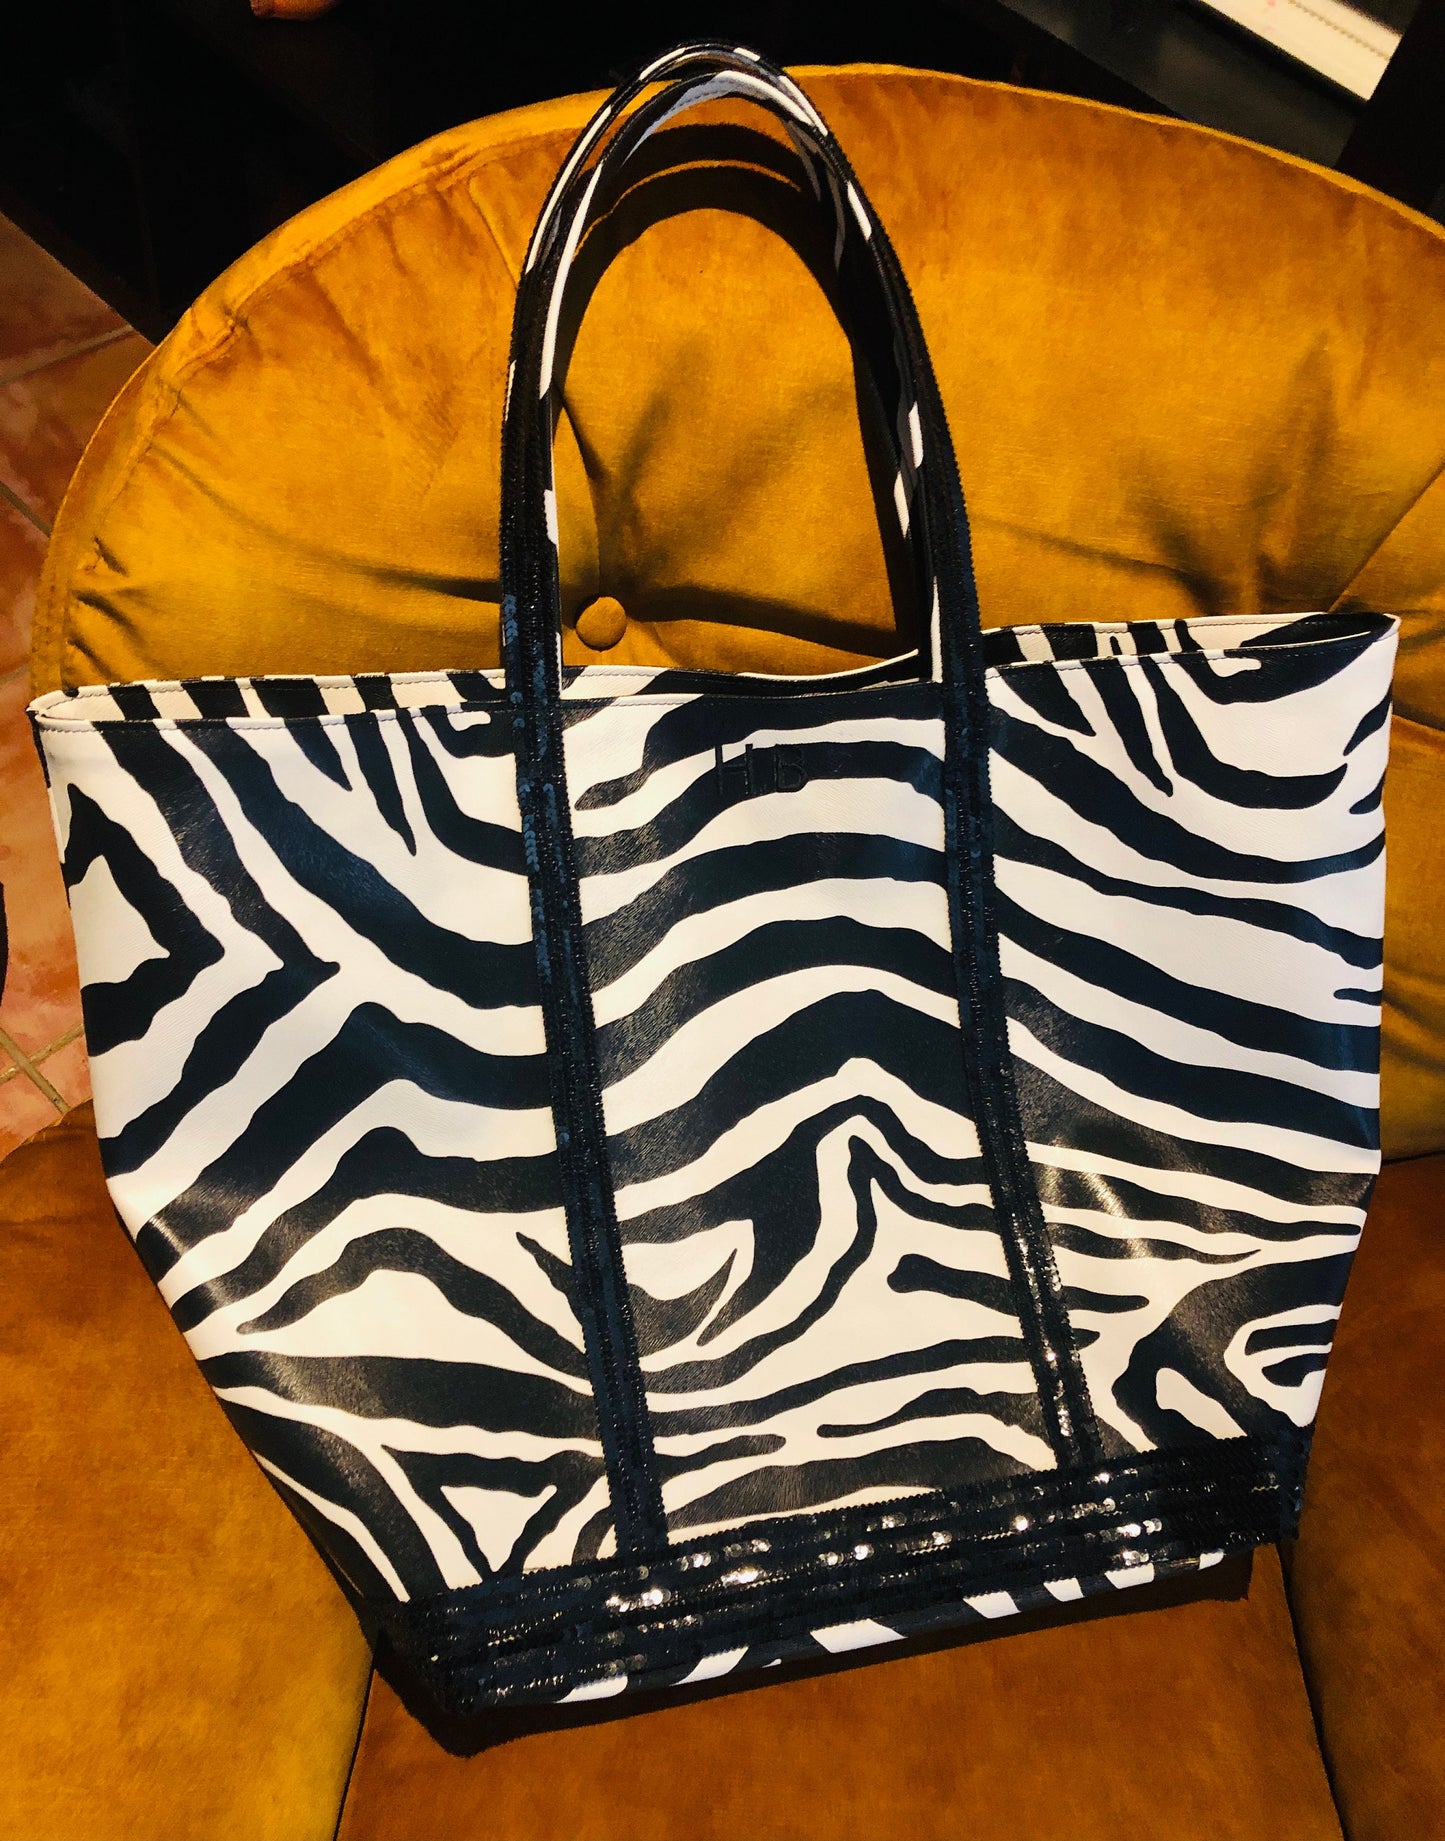 Faux leather zebra tote bag with black sequins